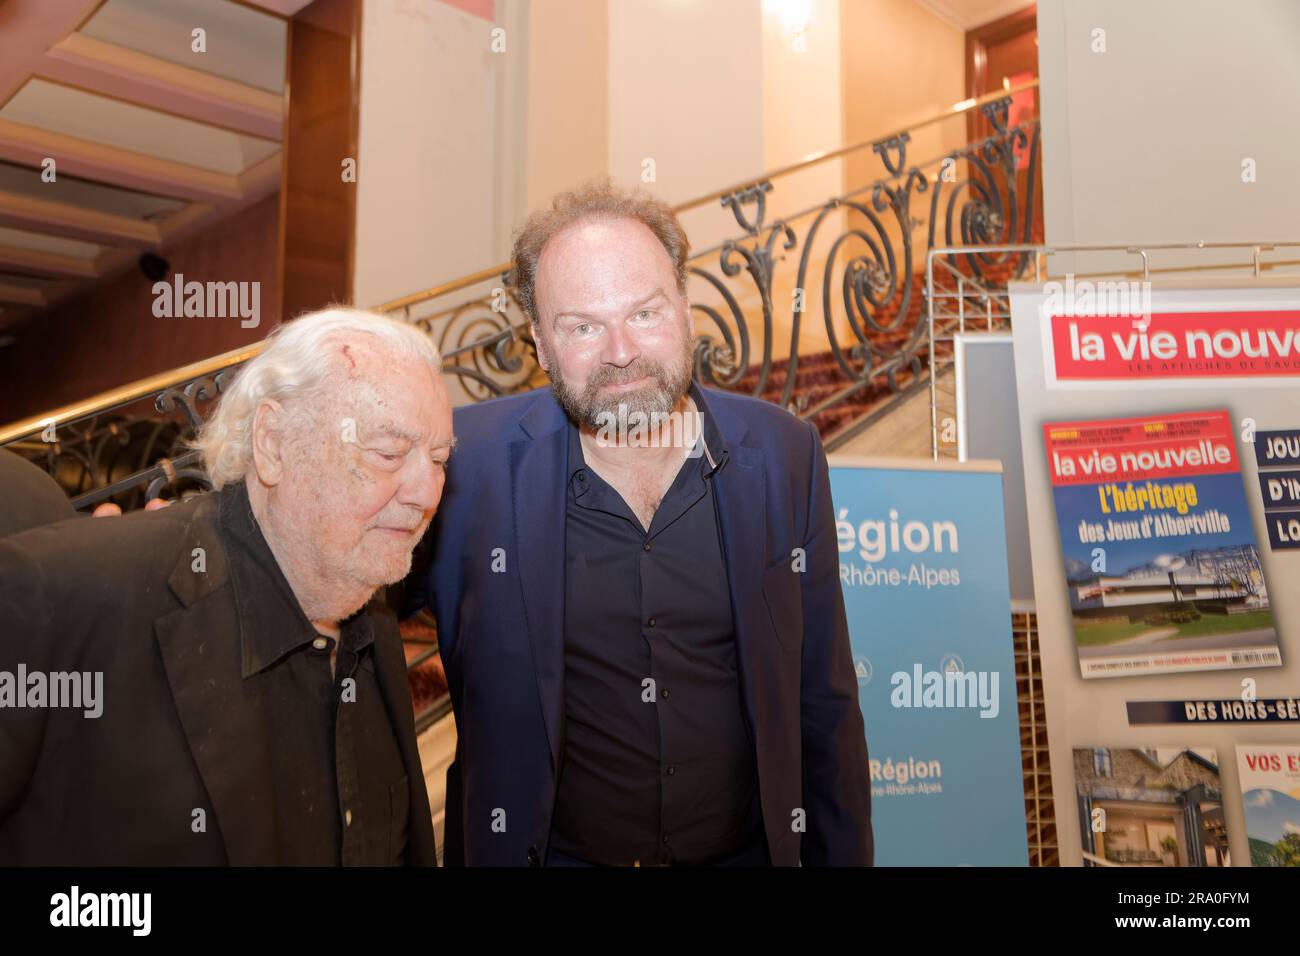 Aix-Les-Bains, 2023.6th June, 2023. Norbert Saada, music, film and television producer and Jean-Pierre Ameris, director attend the French Film and Gas Stock Photo